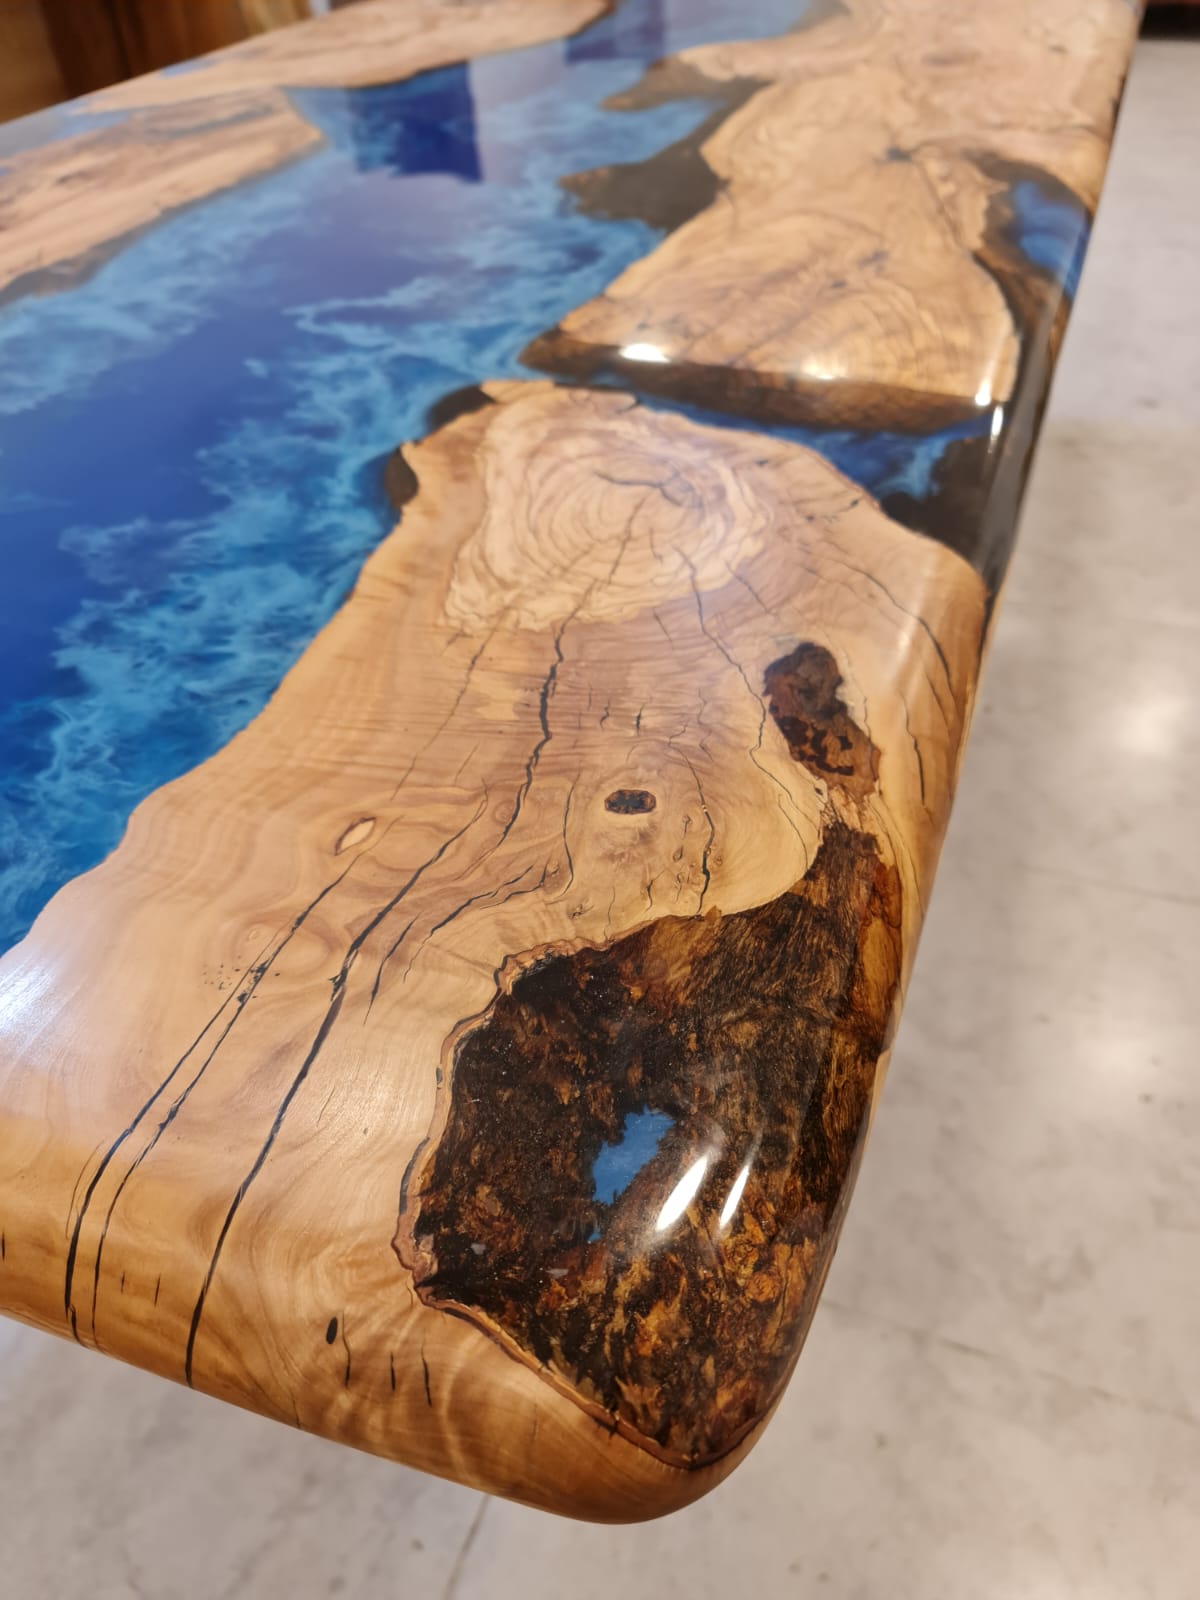 Live Edge Epoxy Resin Dining Table - Made to order